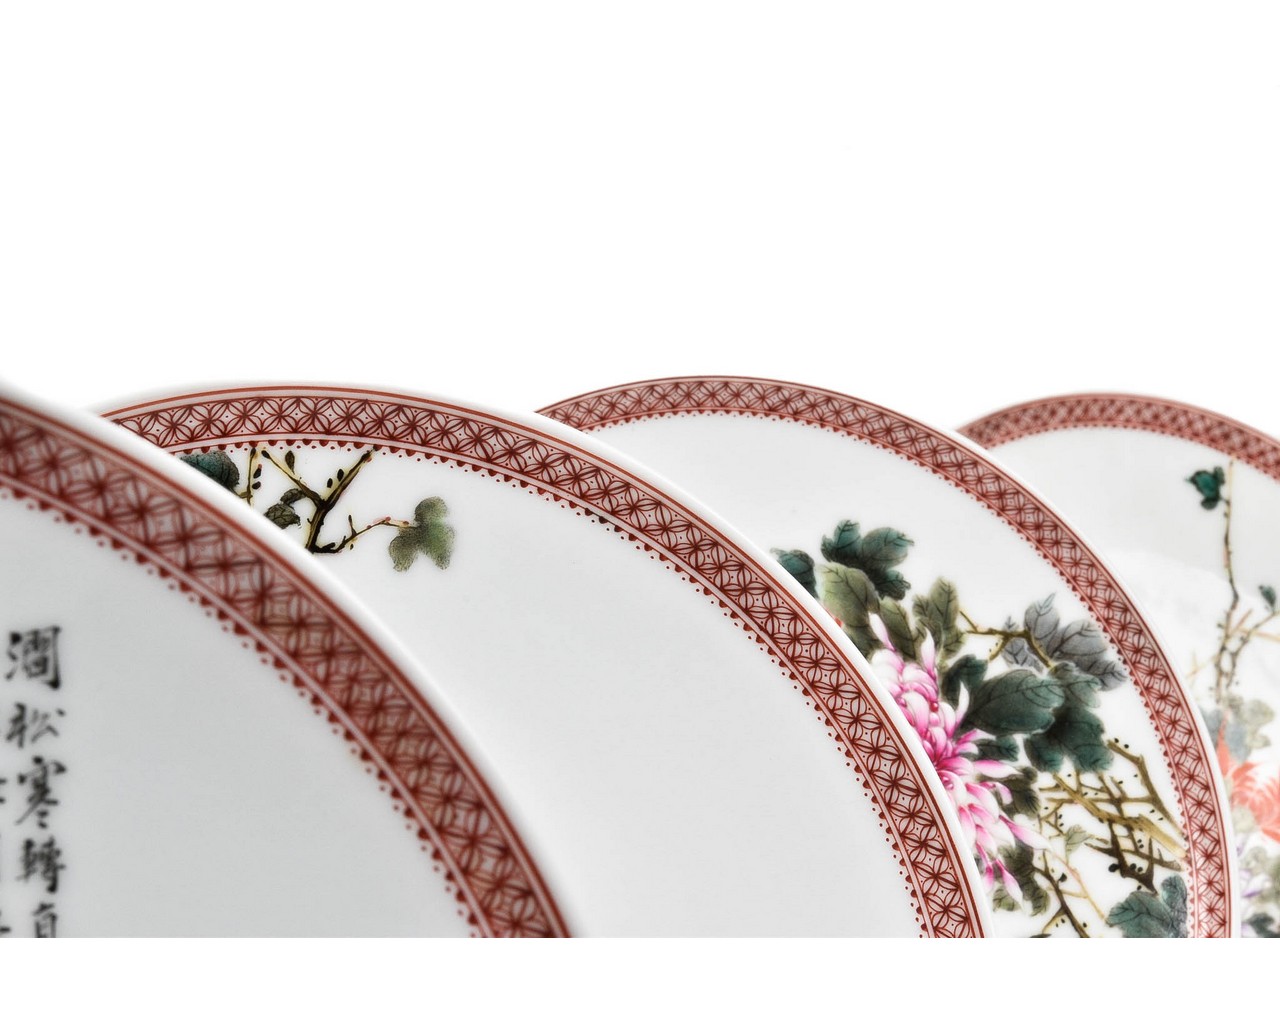 SUPERB SET OF FOUR CHINESE PORCELAIN PLATES - Image 5 of 8